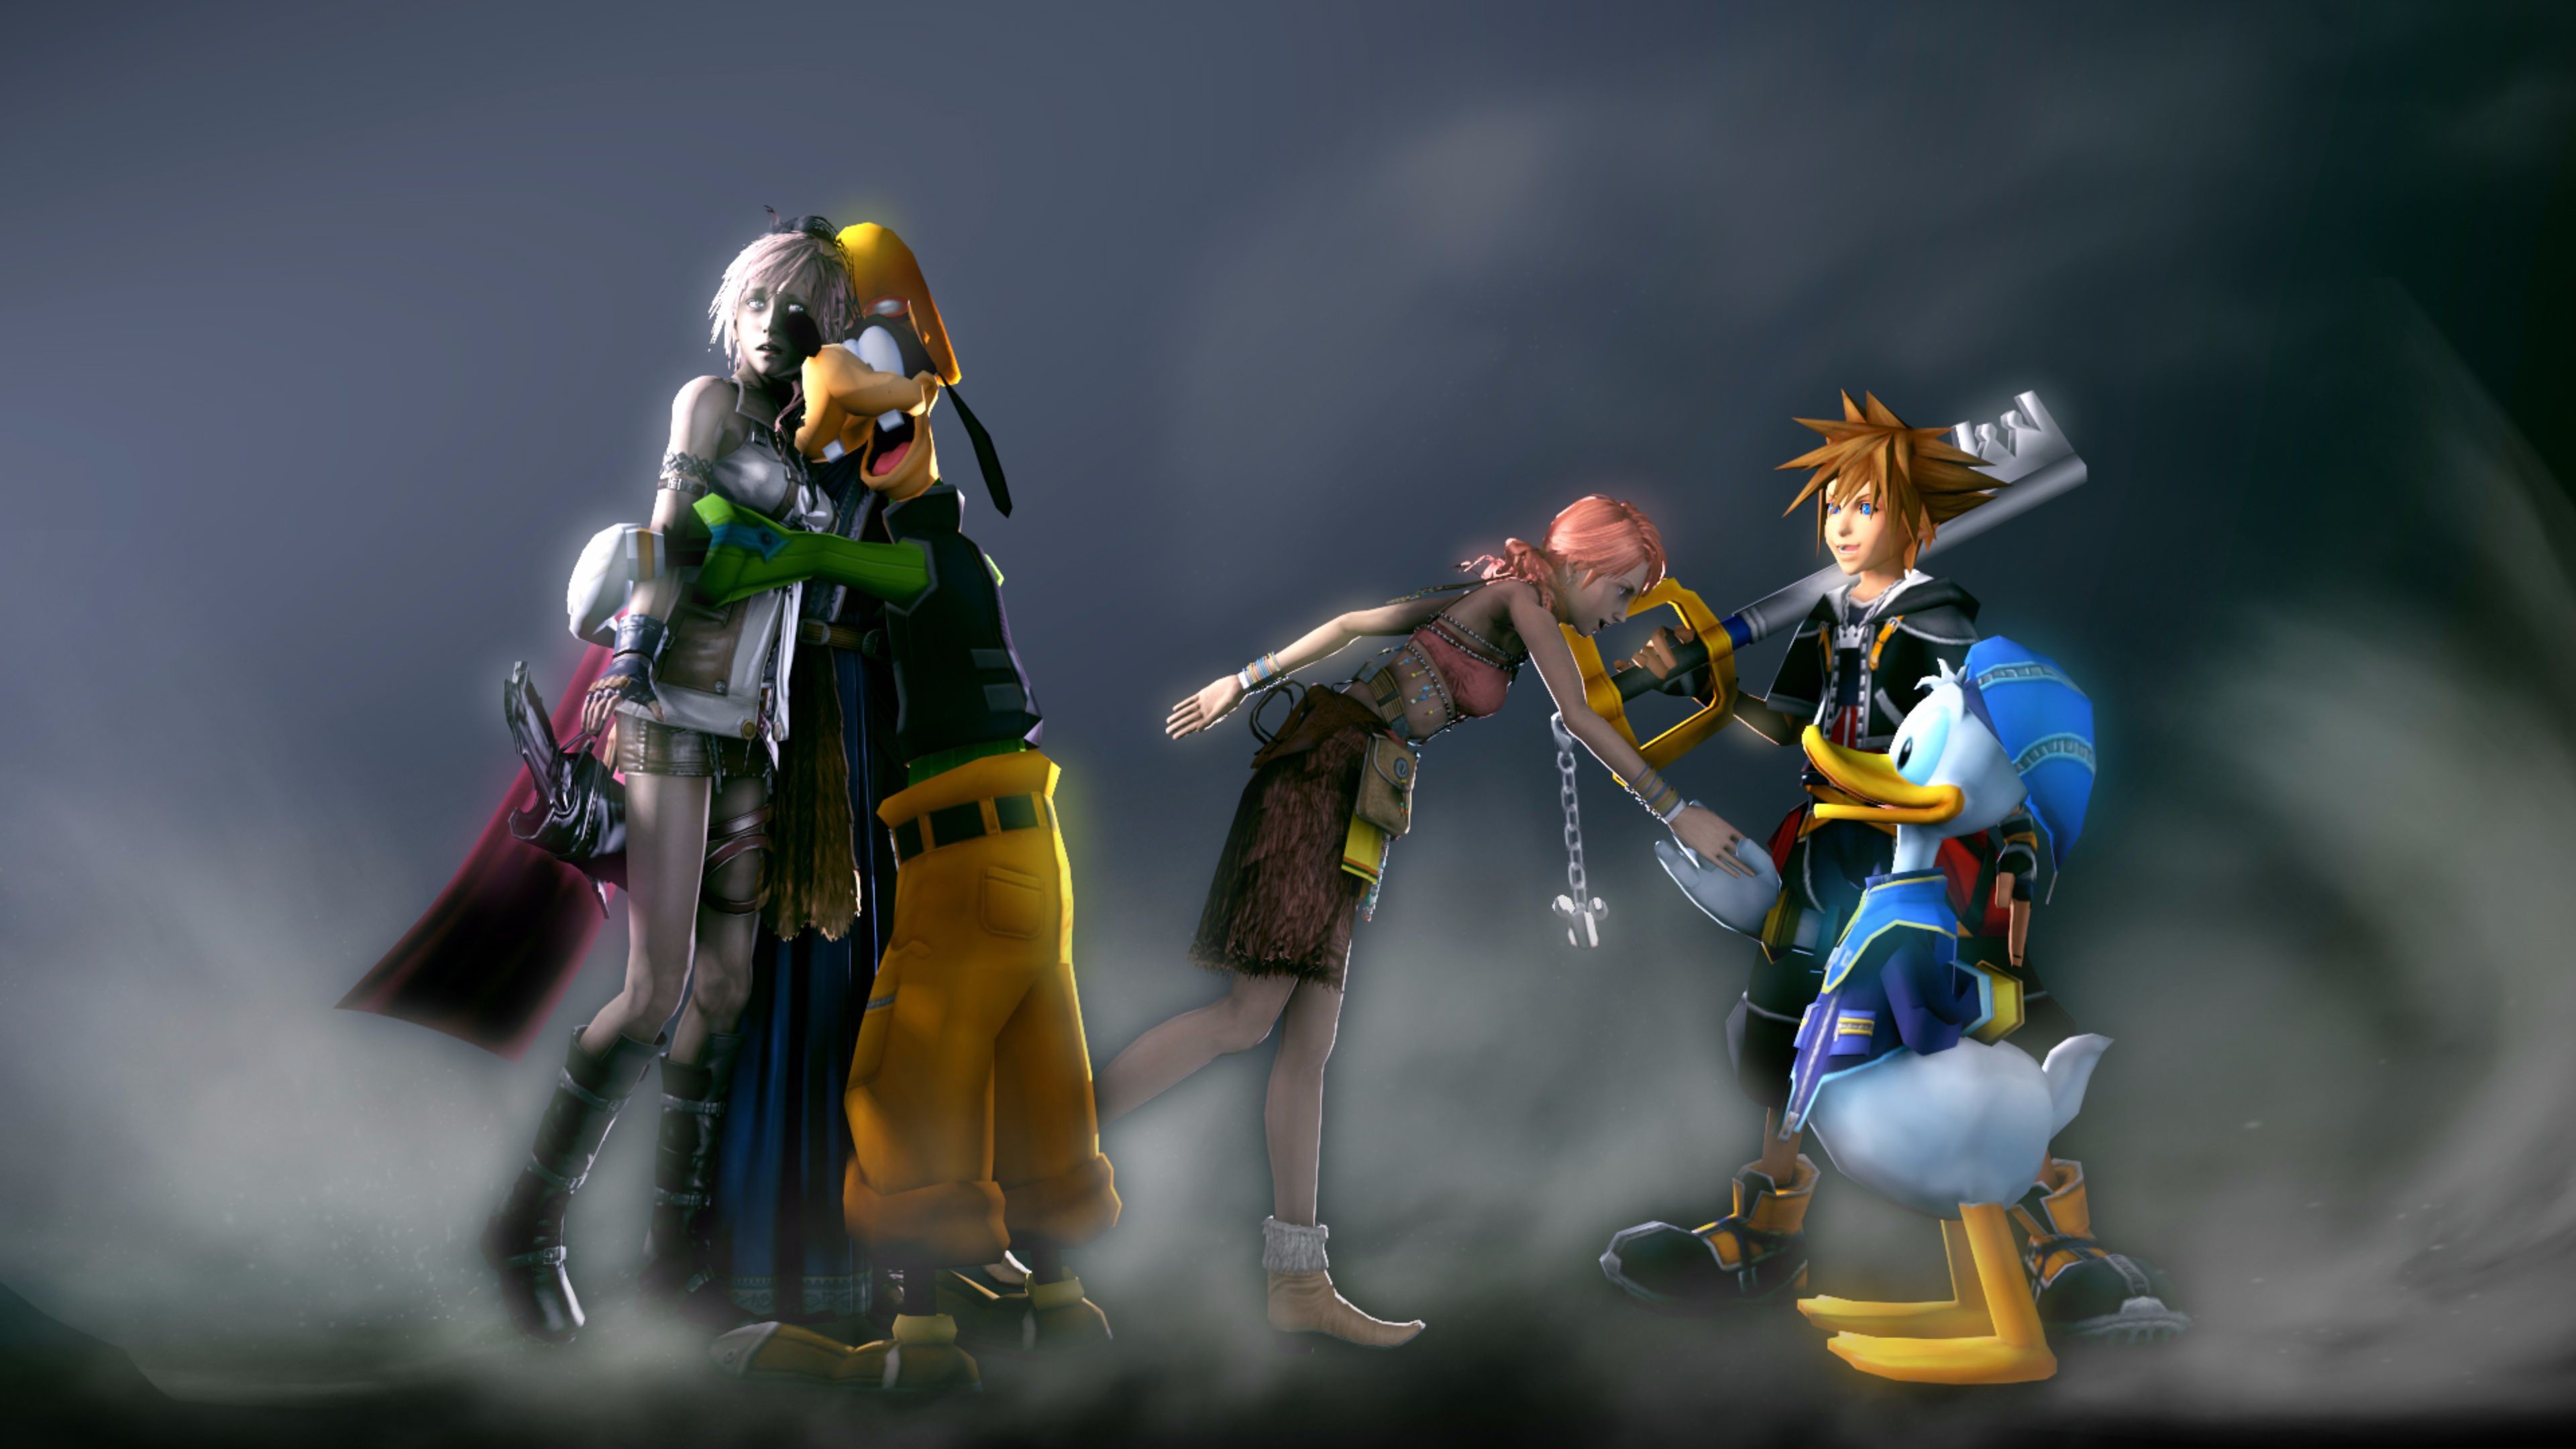 kh wallpaper,action figure,yellow,figurine,fictional character,toy